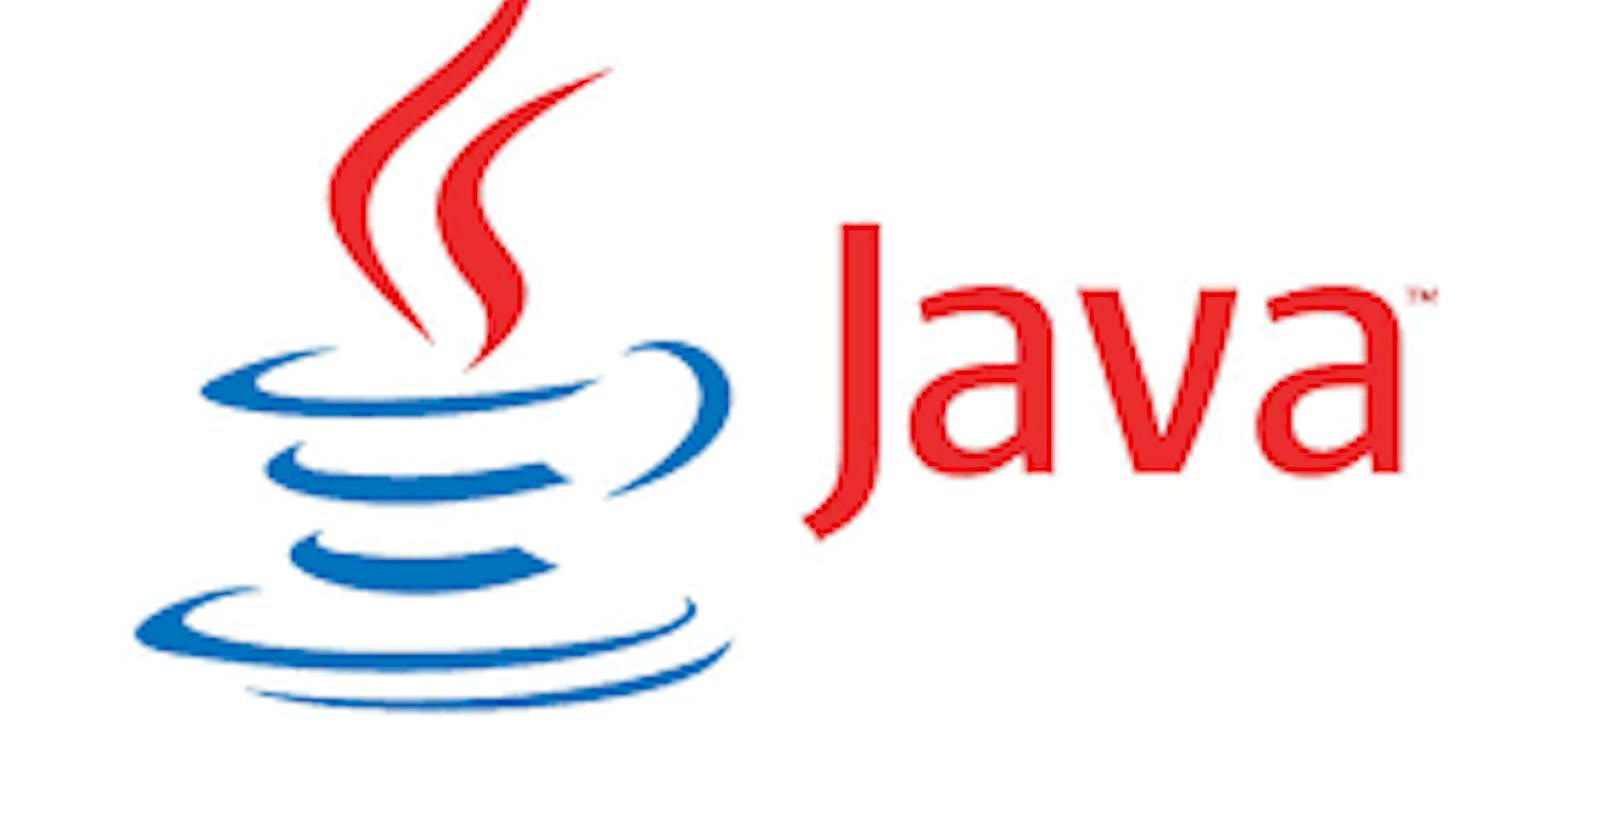 Java Concurrency